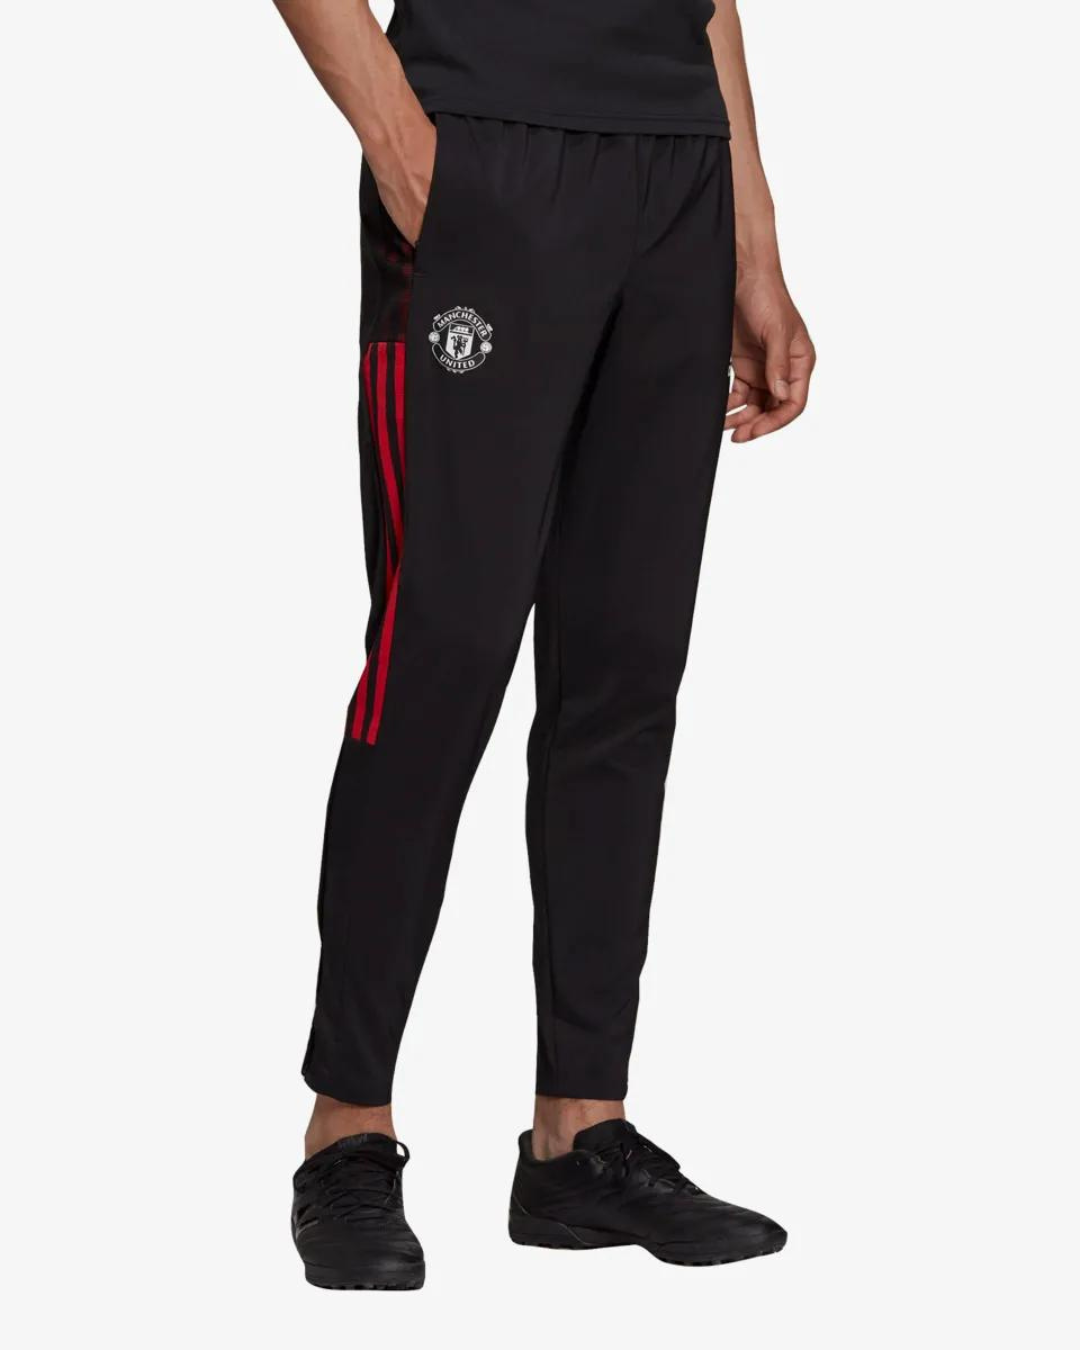 Manchester United 2021/2022 Track Pants - Black/Red